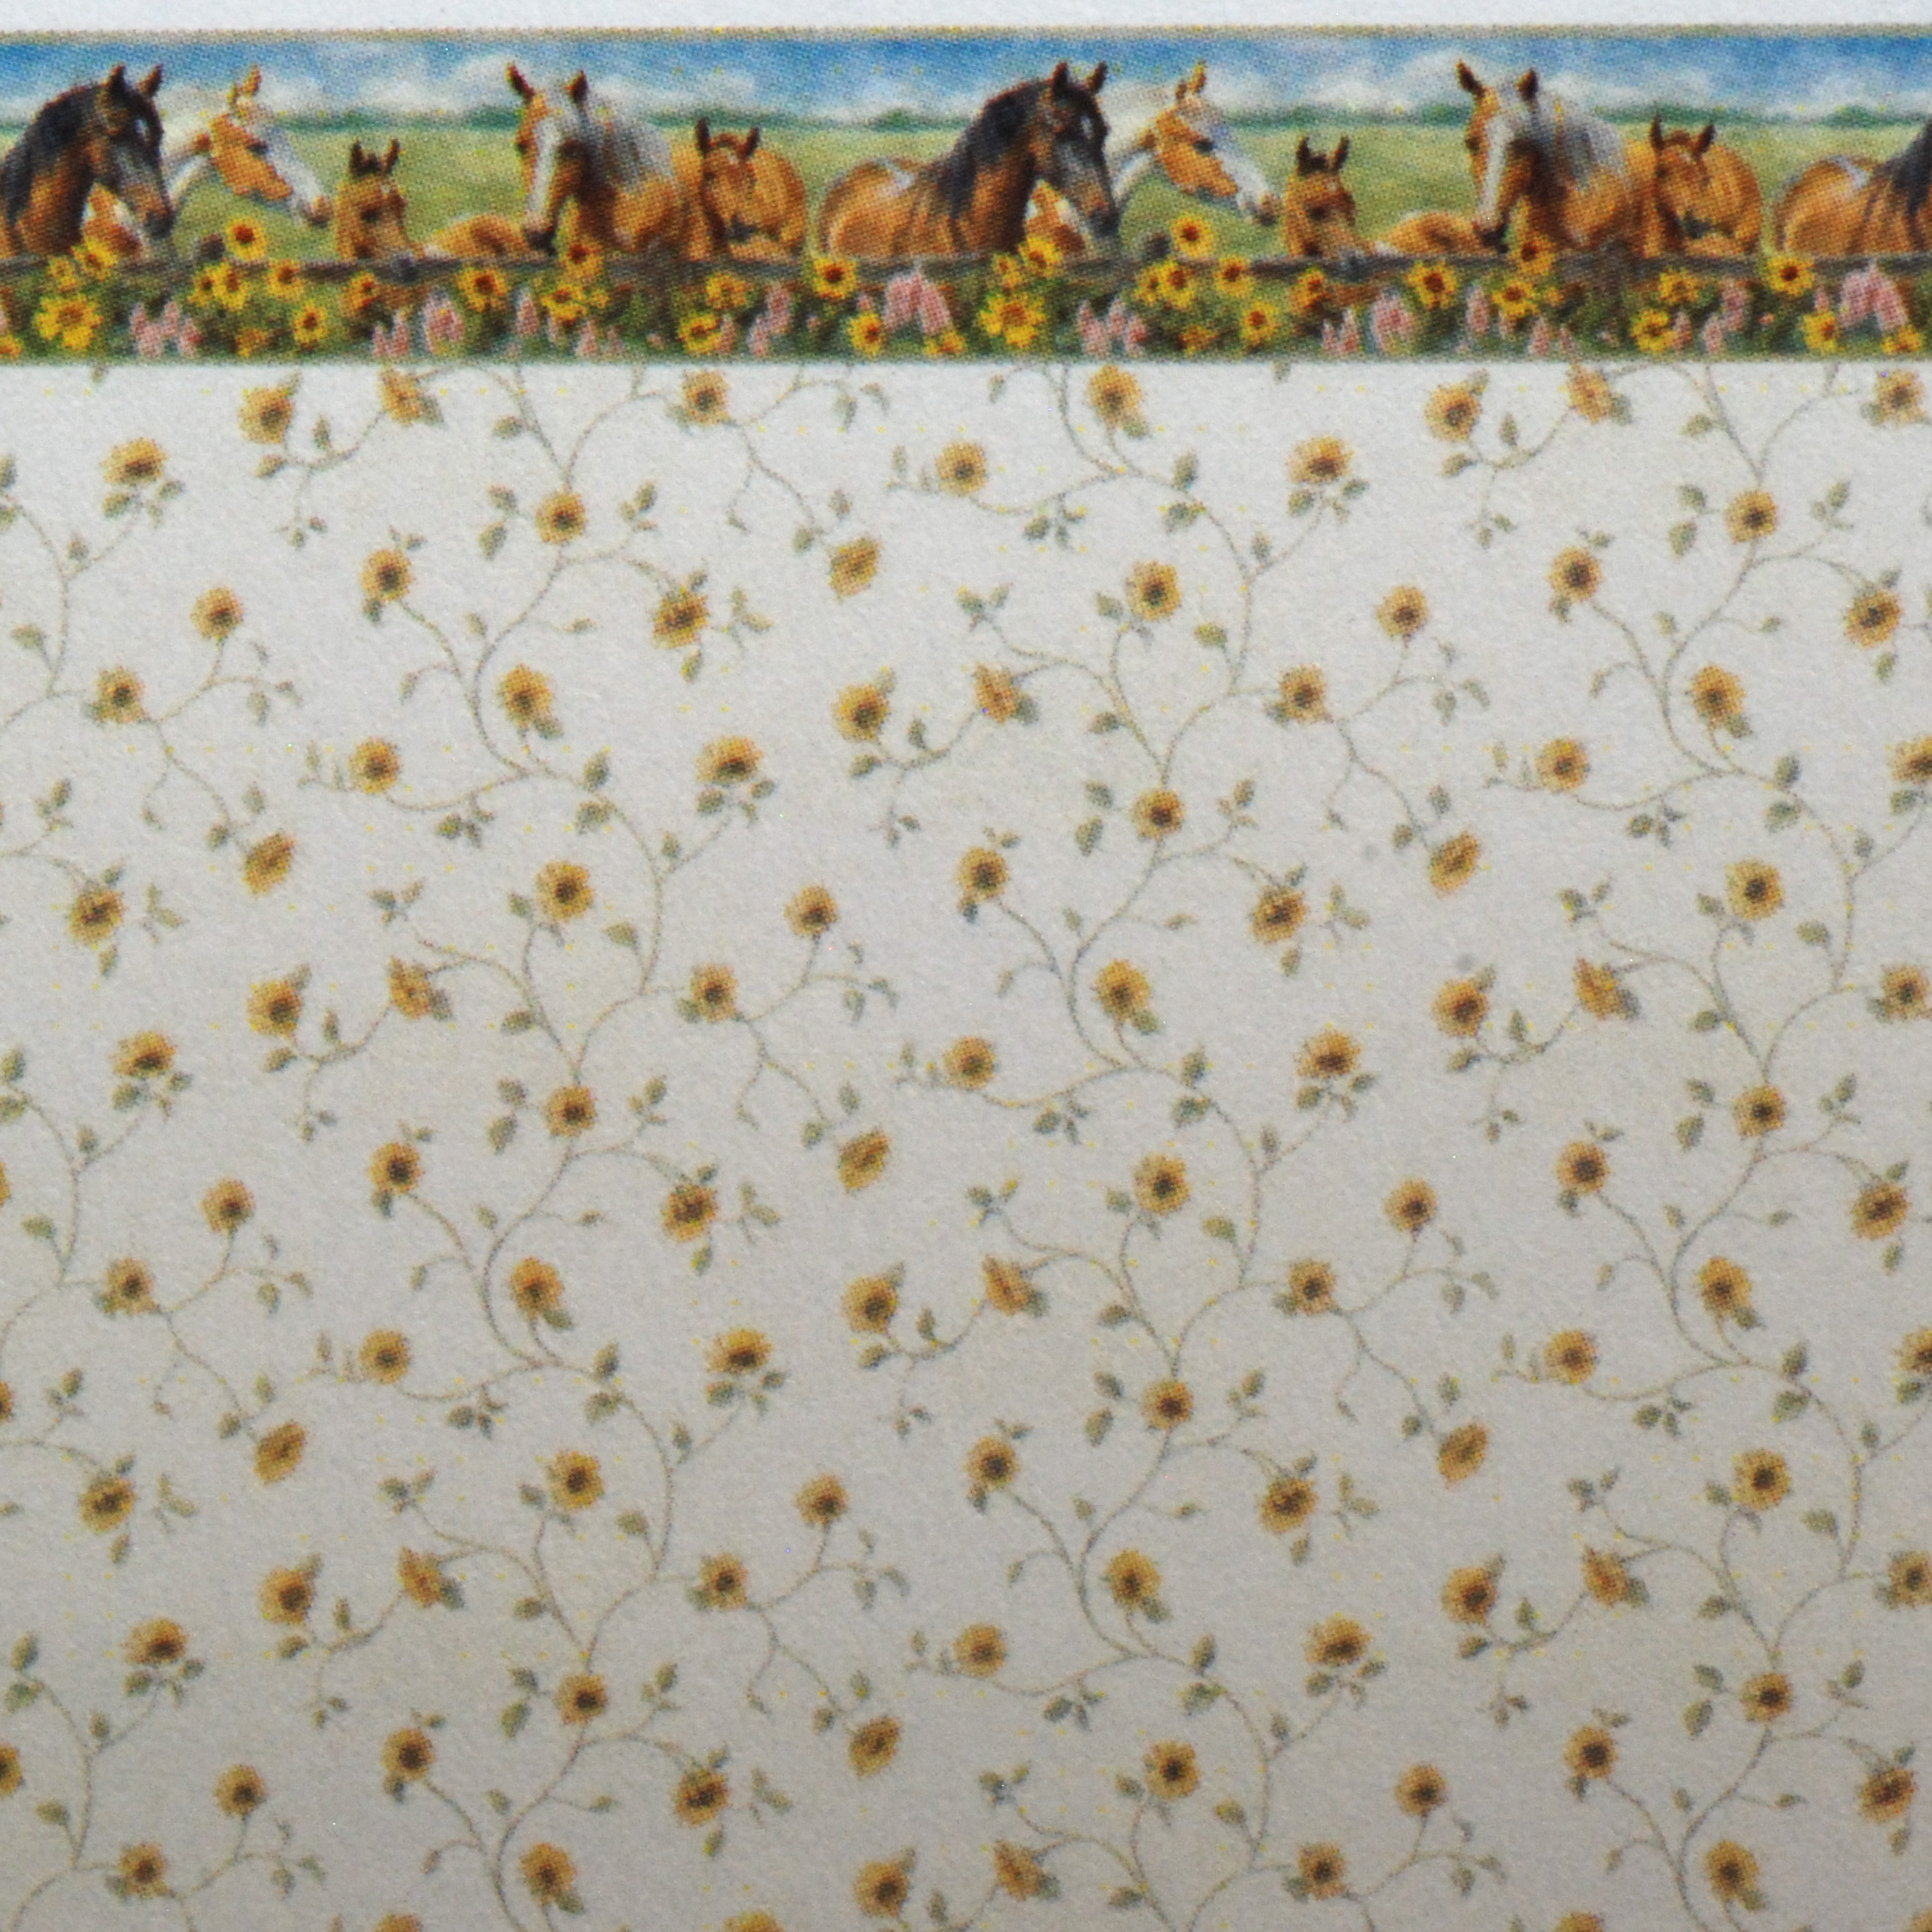 Wallpaper Horses And Sunflowers Stewart Dollhouse Creations